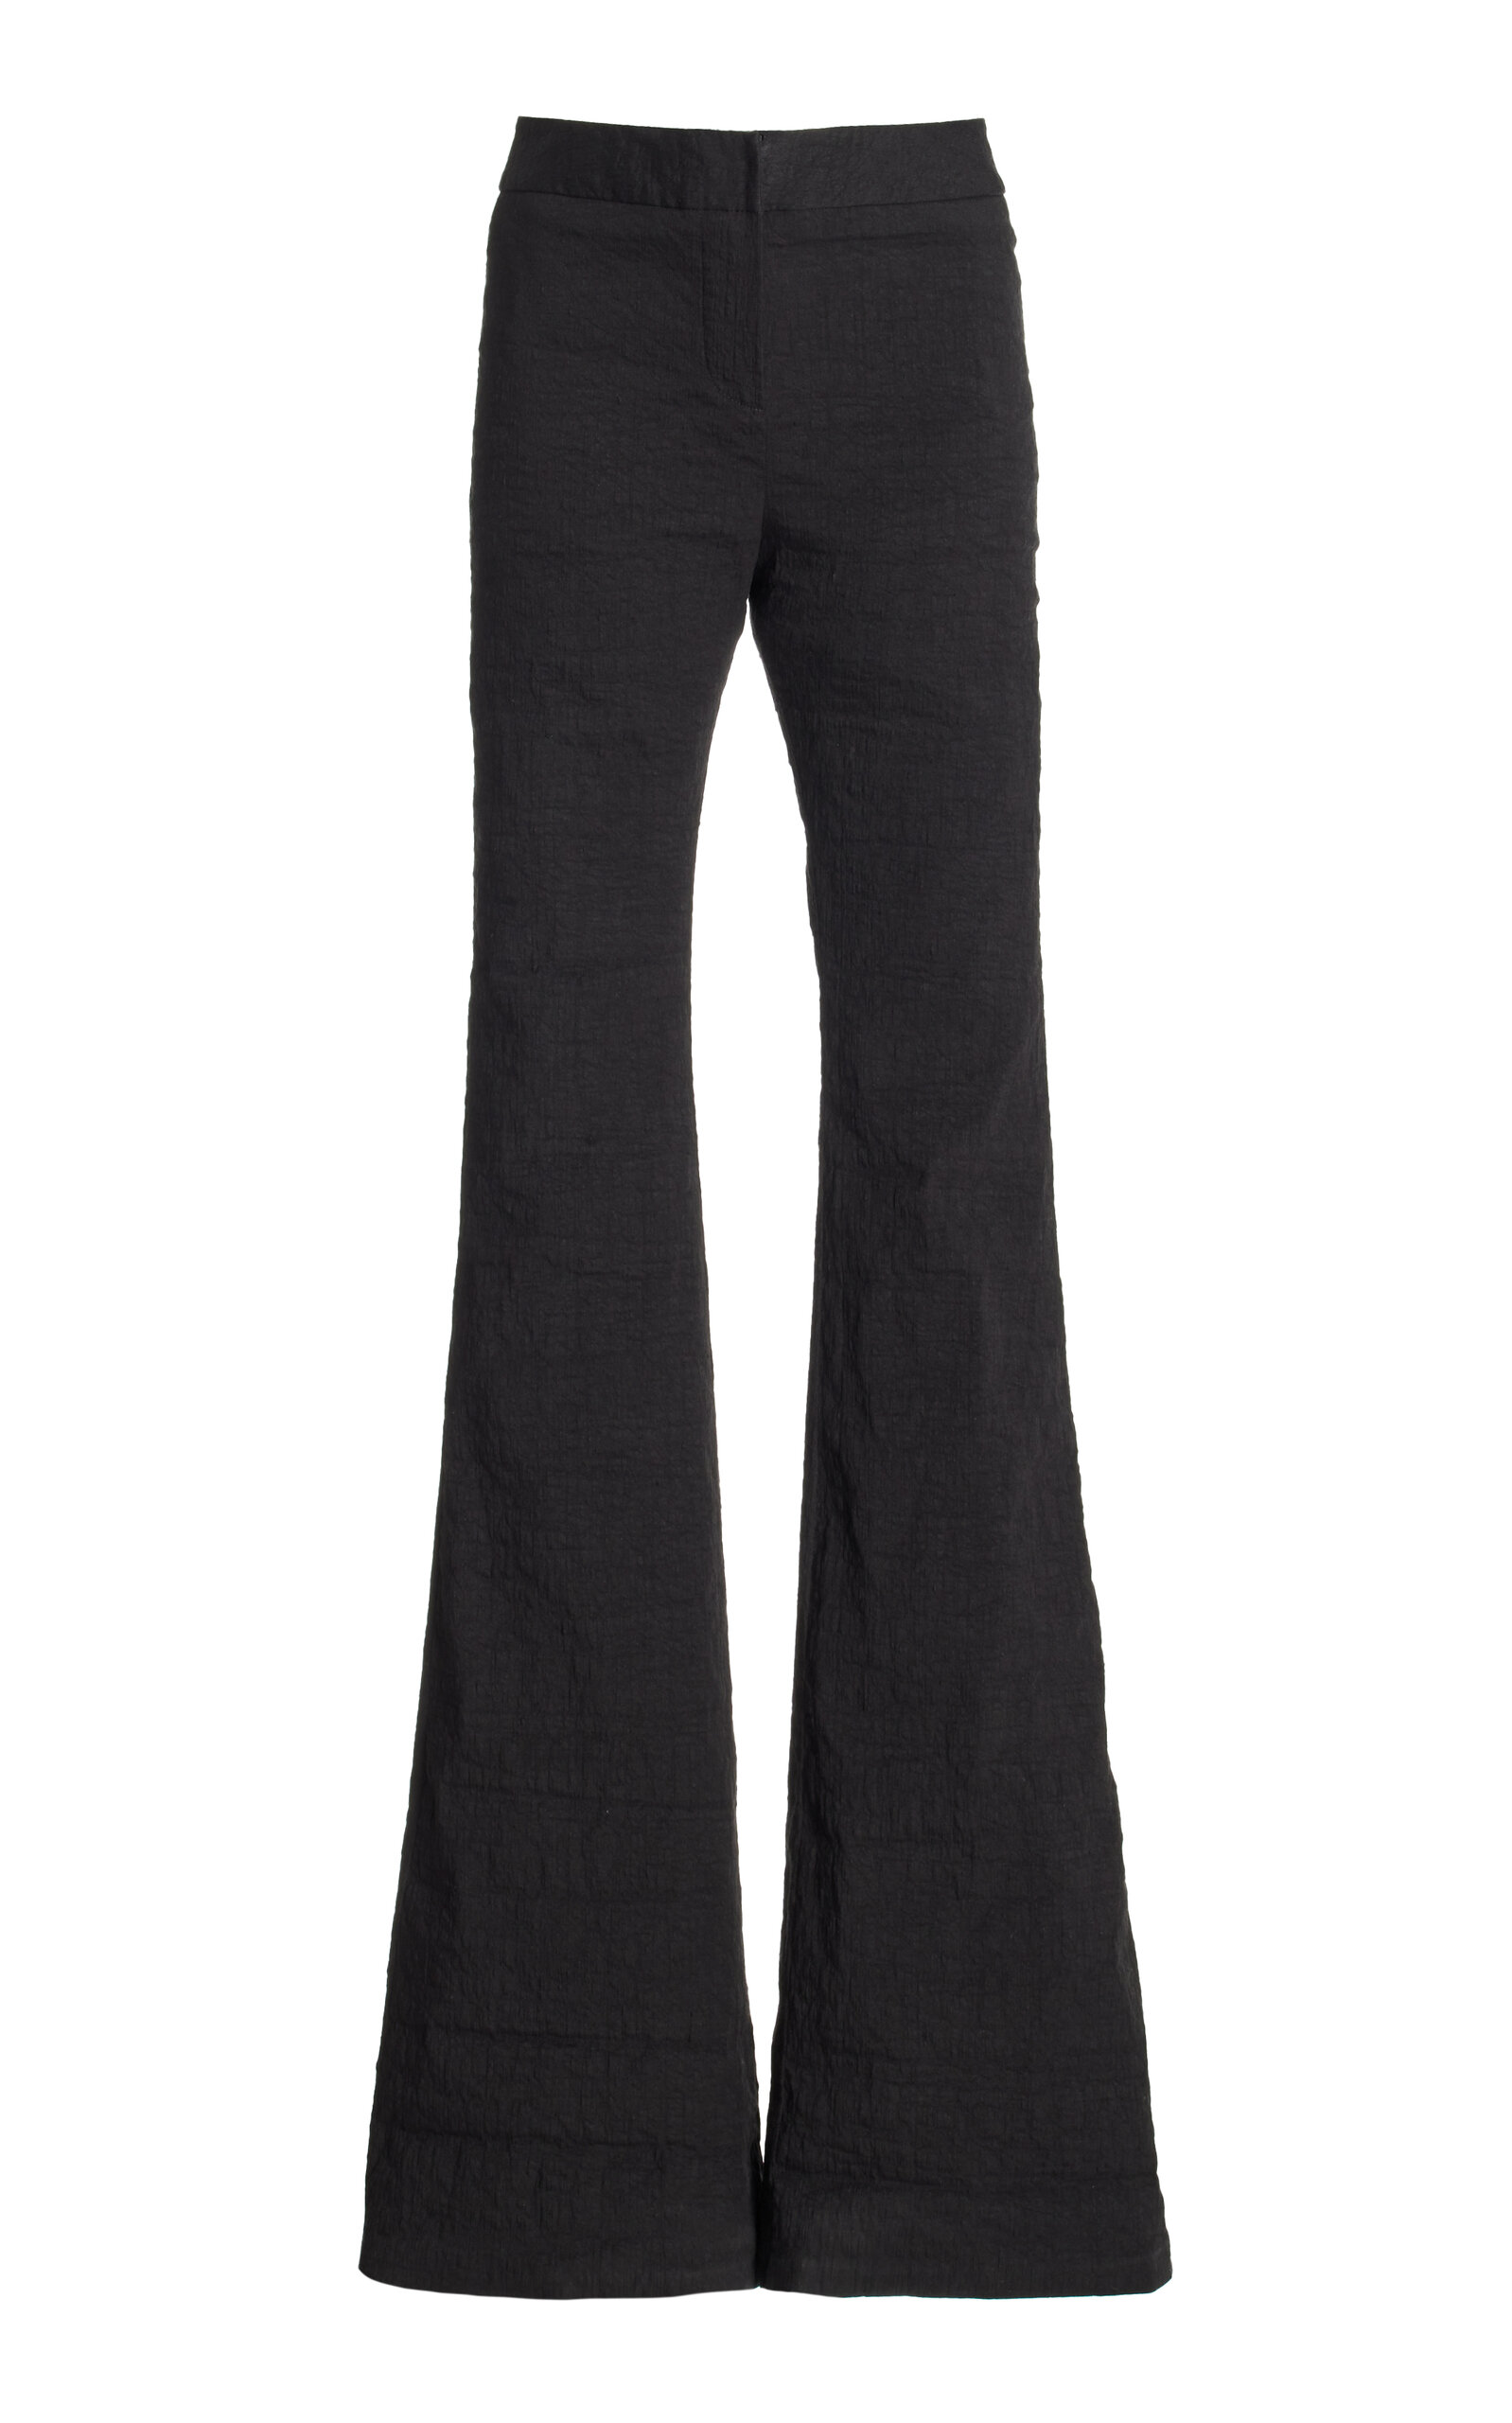 The Fae Flared Stretch Linen-Blend Pants